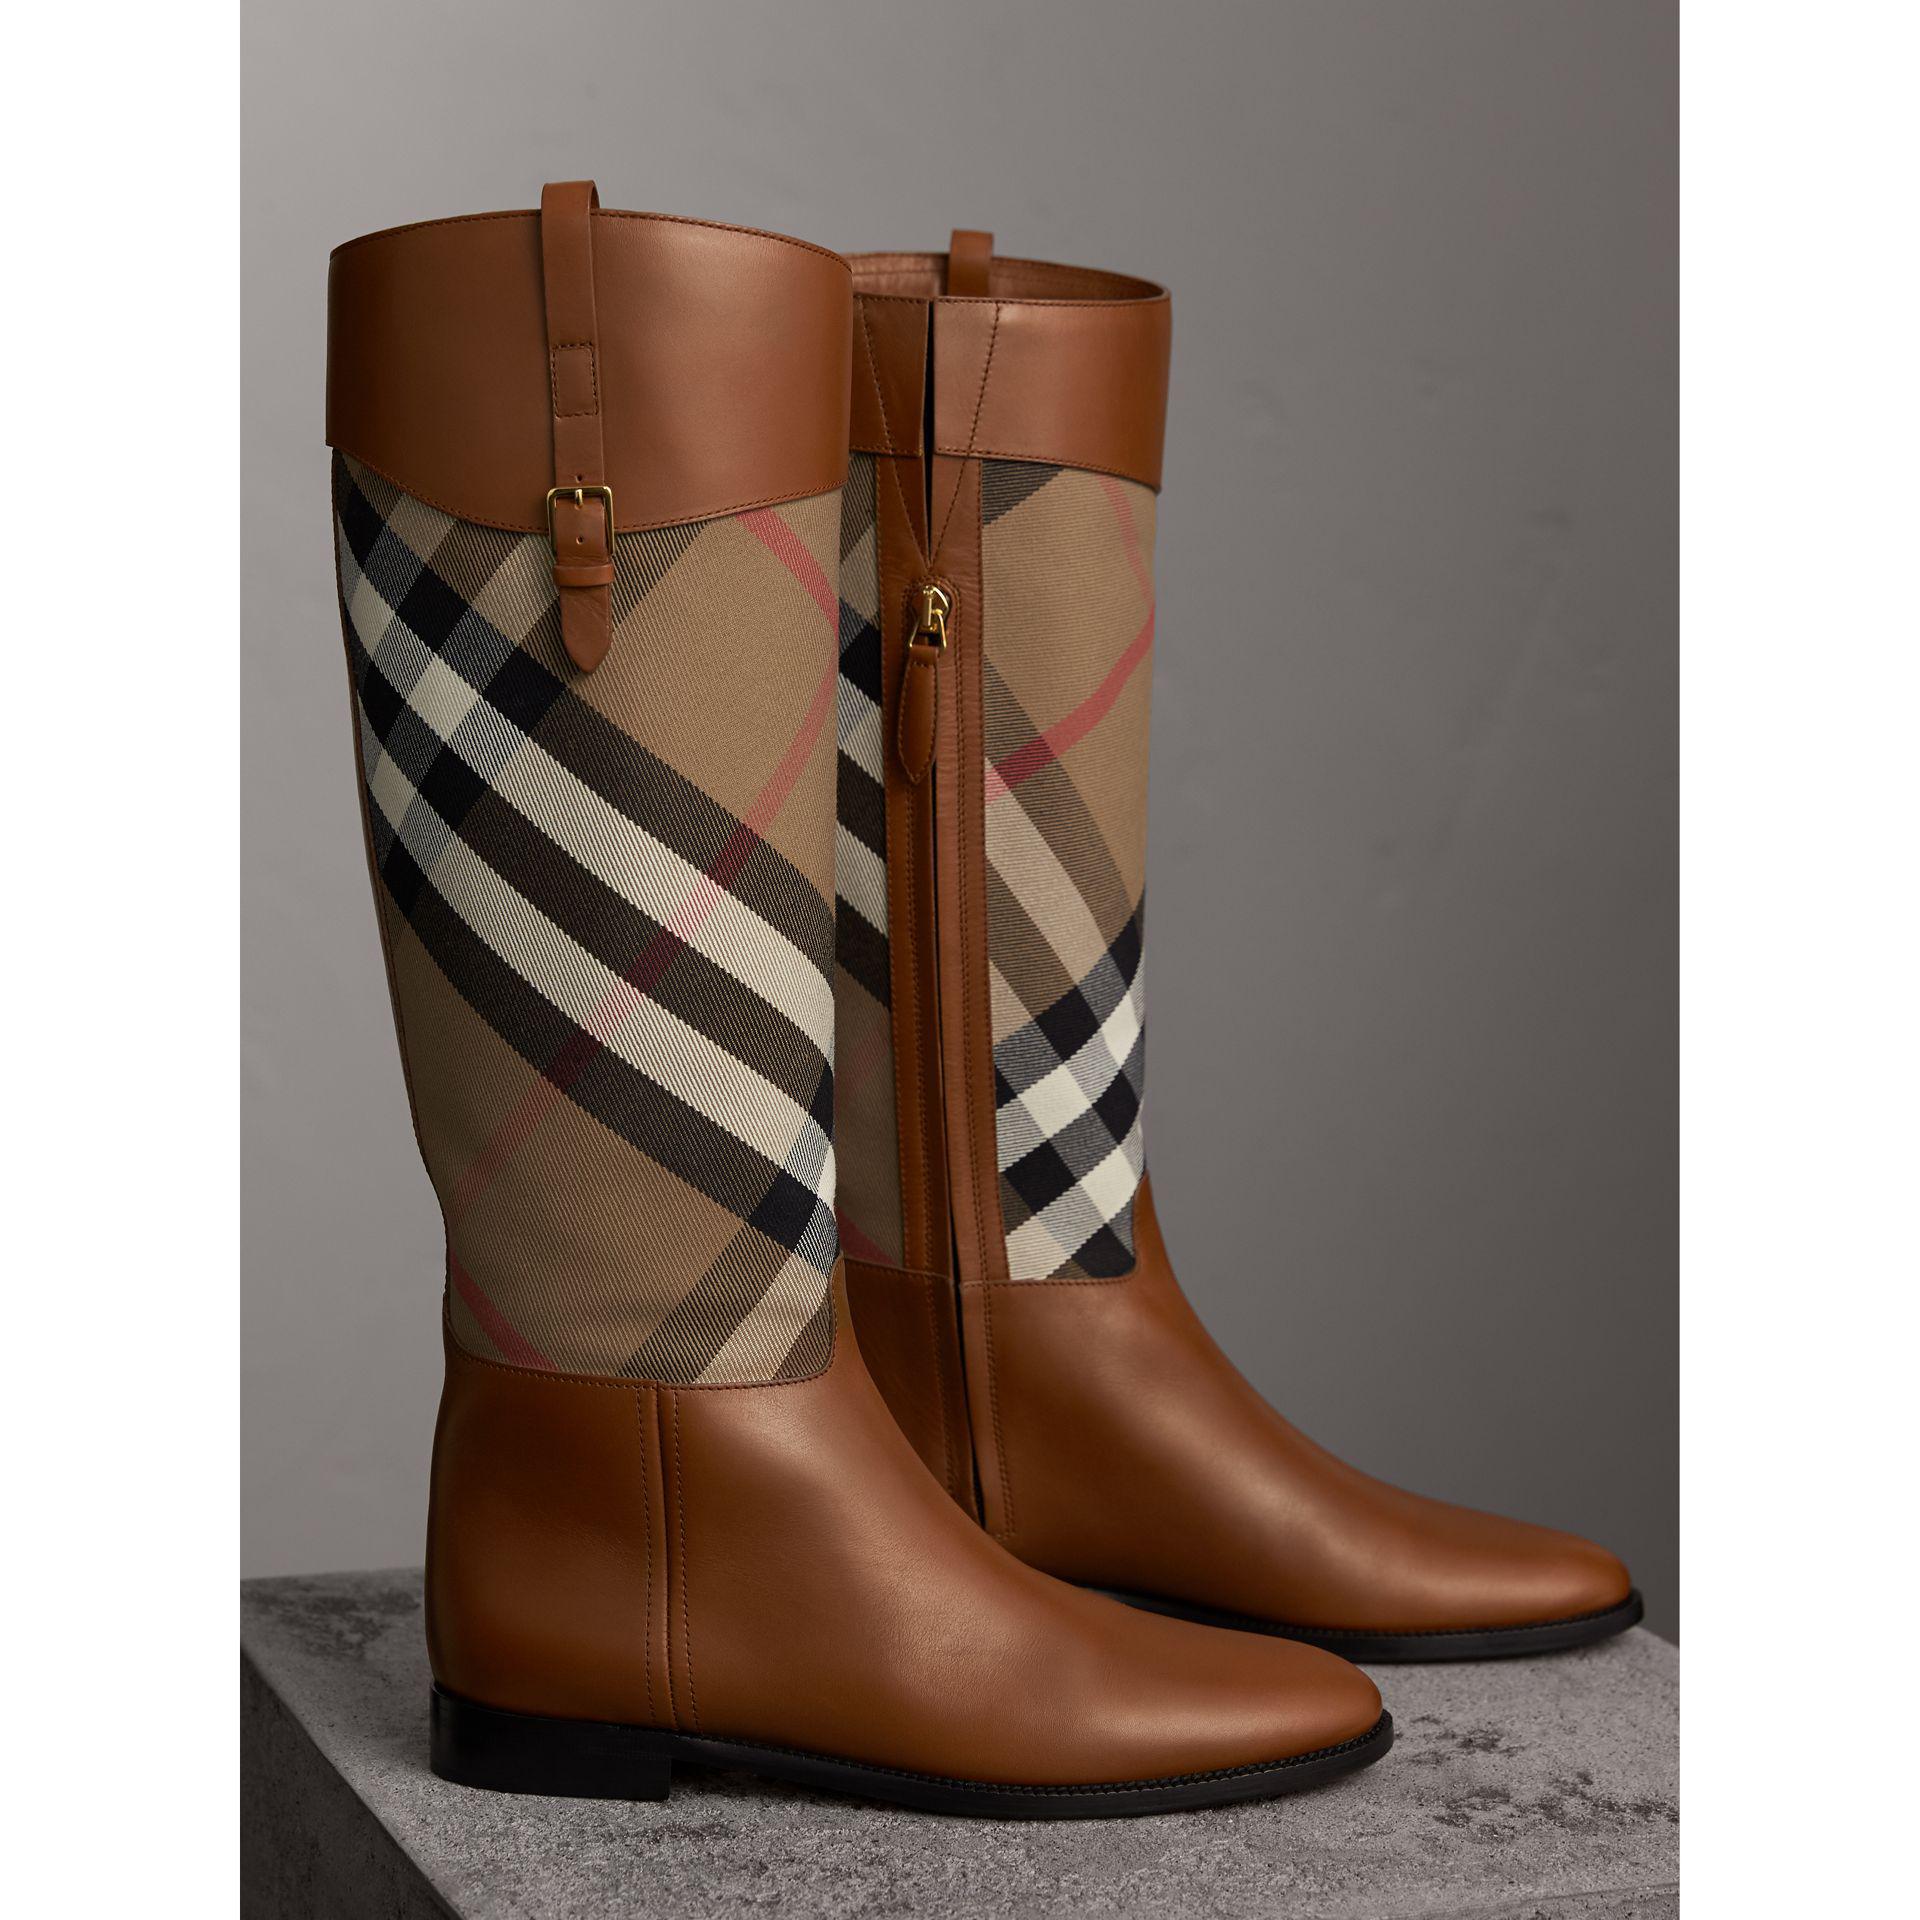 Lyst - Burberry House Check and Leather Riding Boots